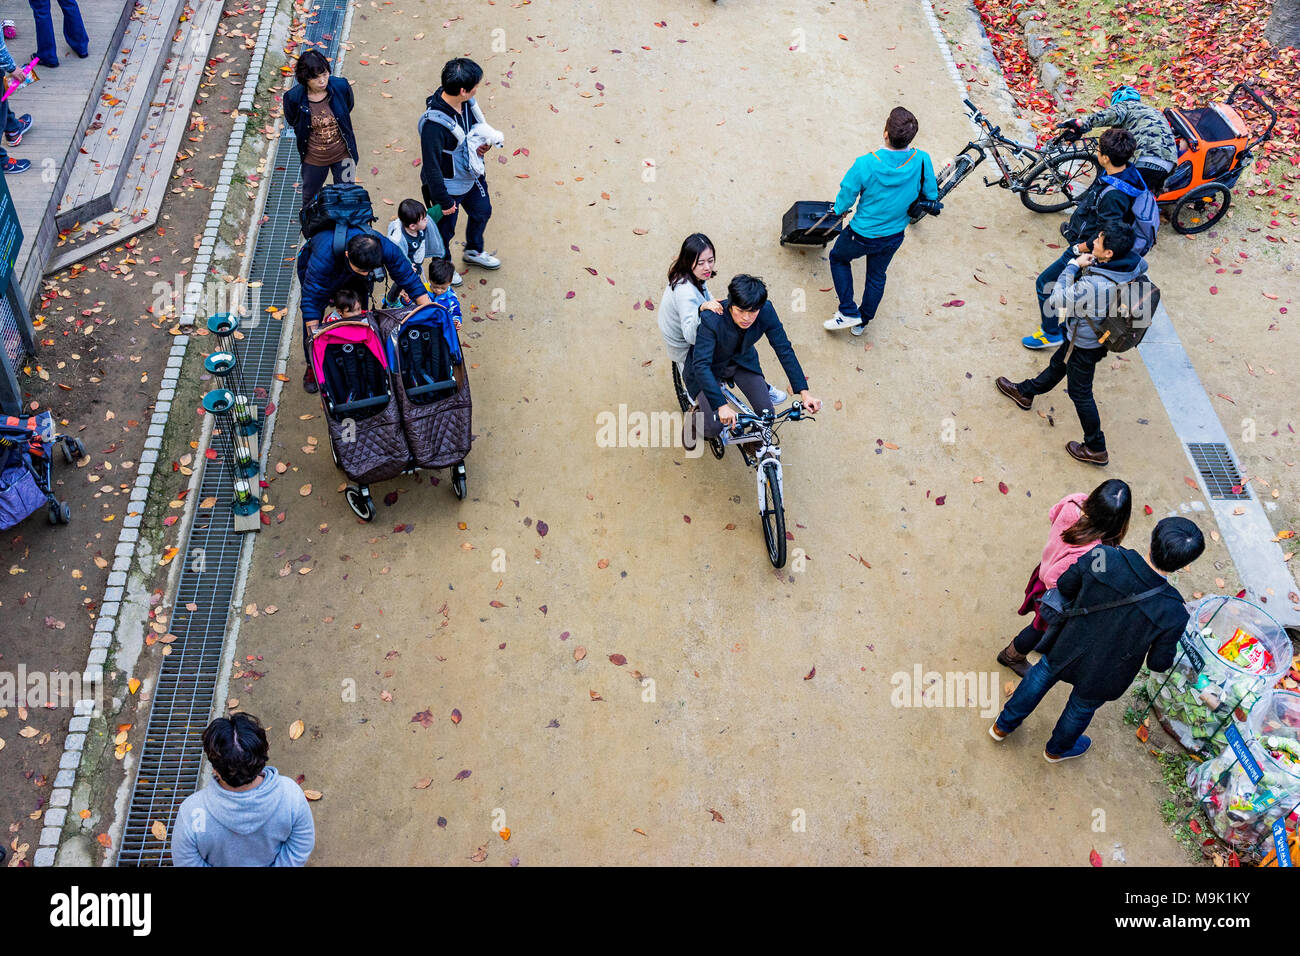 SEOUL, SOUTH KOREA - NOVEMBER 15: Path with people walking and playing in Seoul Forest Park on September 15, 2015 in Seoul Stock Photo